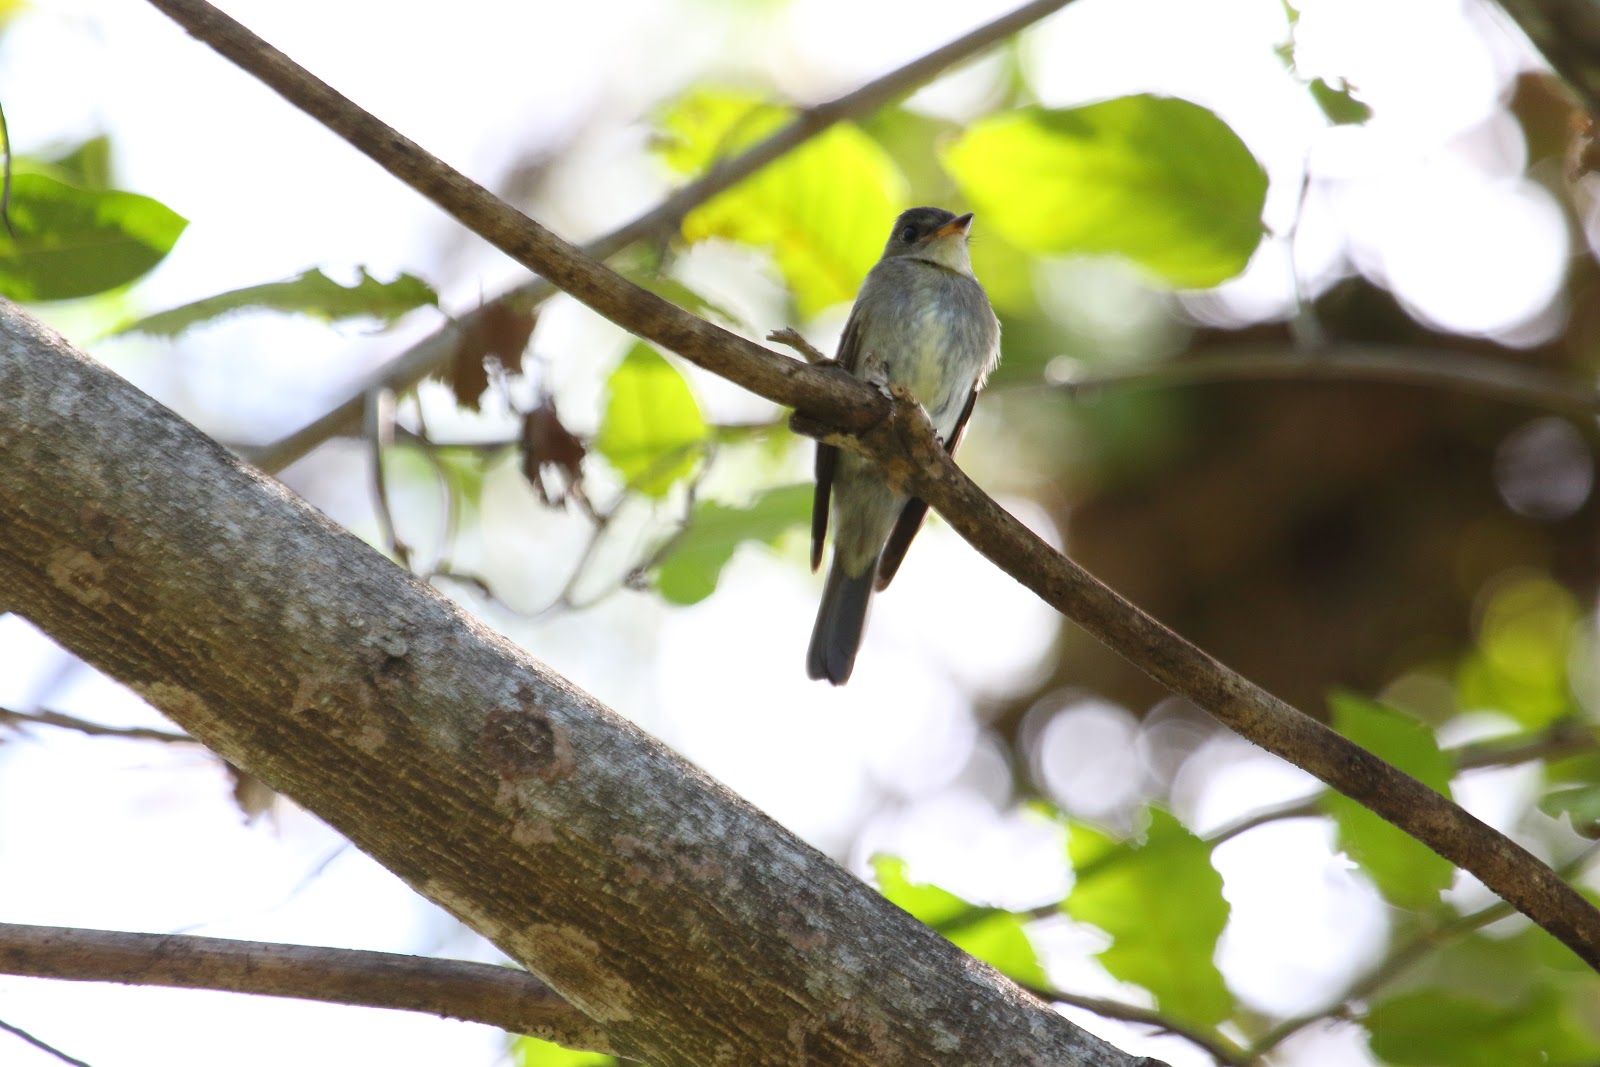 Eastern Wood-Pewee image - click on image for sound